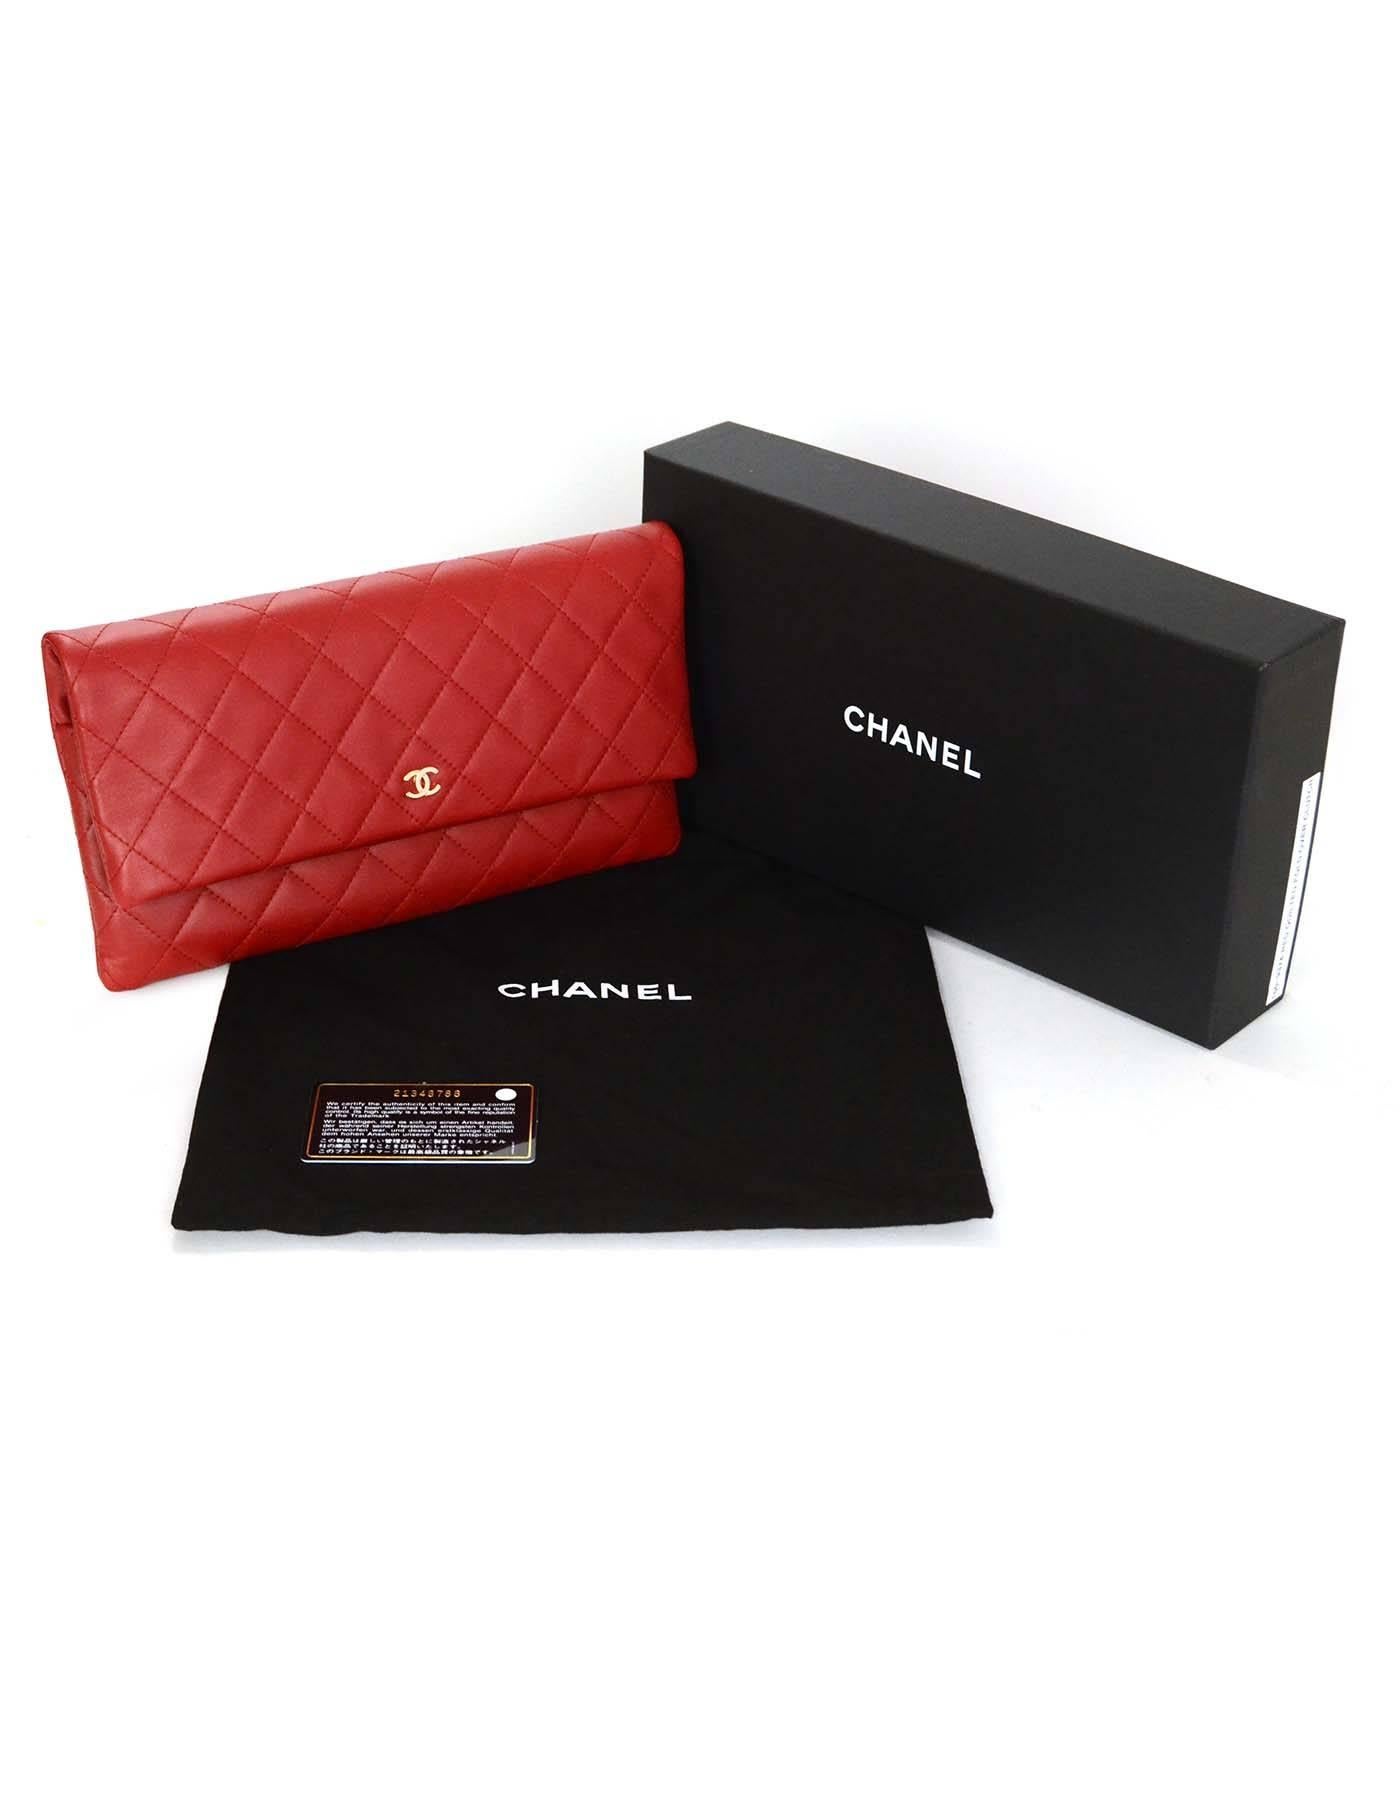 Chanel 2015 Like New Red Lambskin Quilted Fold Over Clutch Bag 2